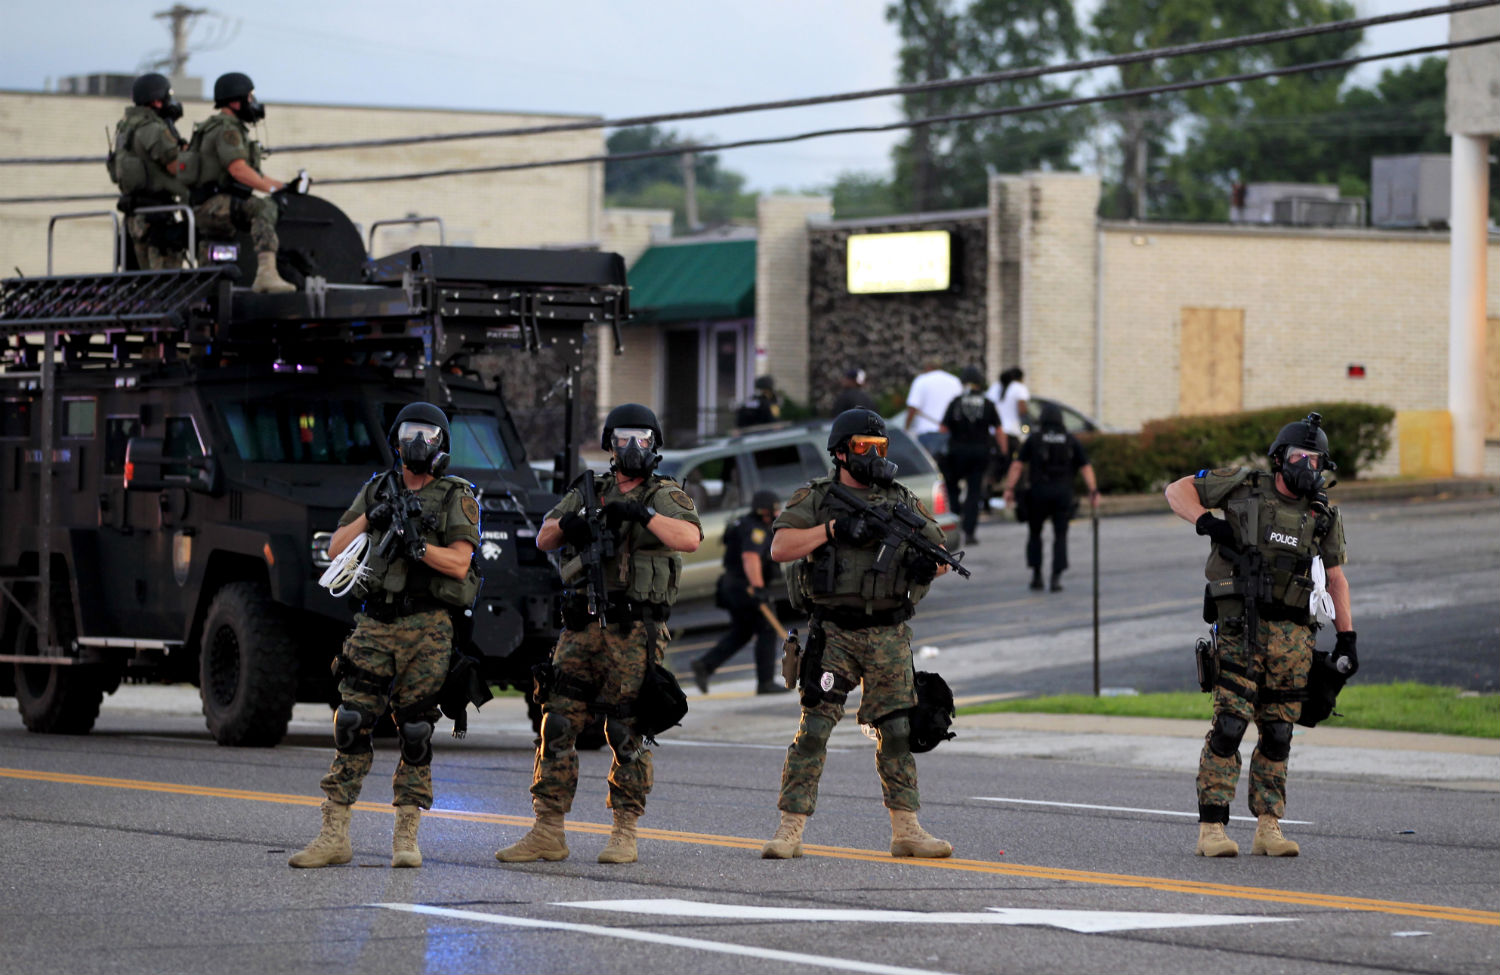 After Ferguson, Will the DOJ Curtail Militarized Policing Across the Country?